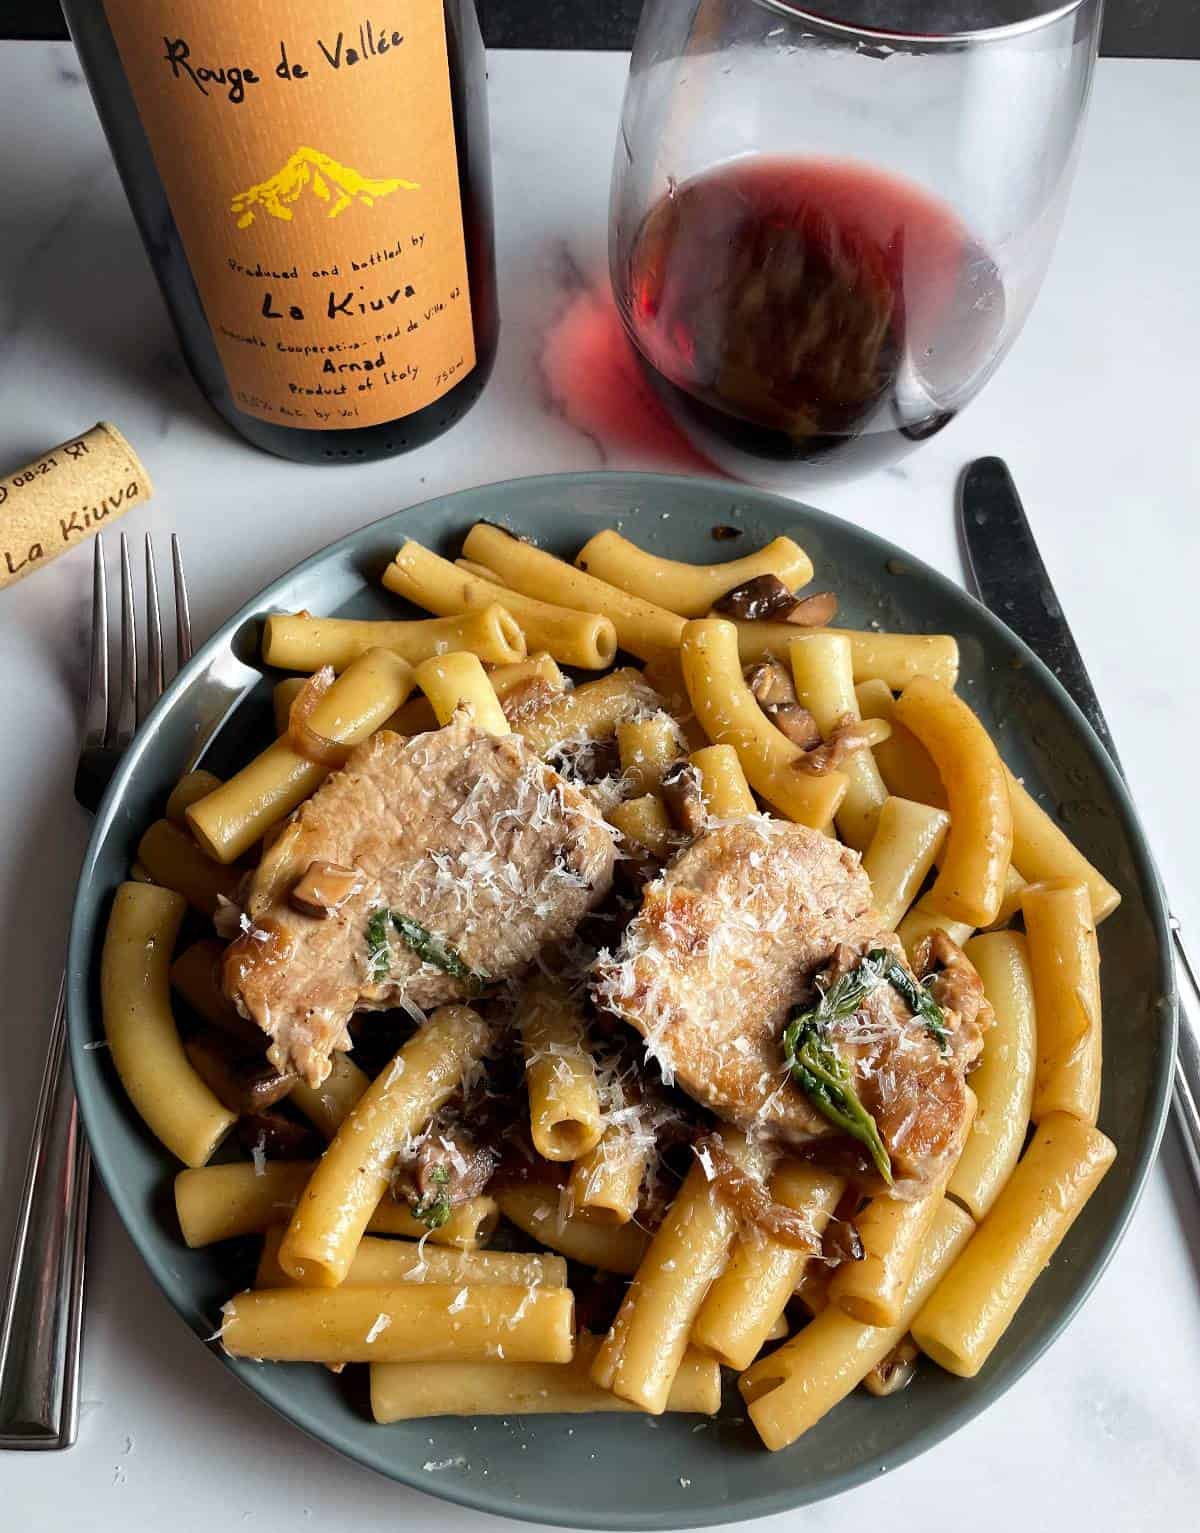 plate of pork tenderloin pasta served with a red wine from Northern Italy.